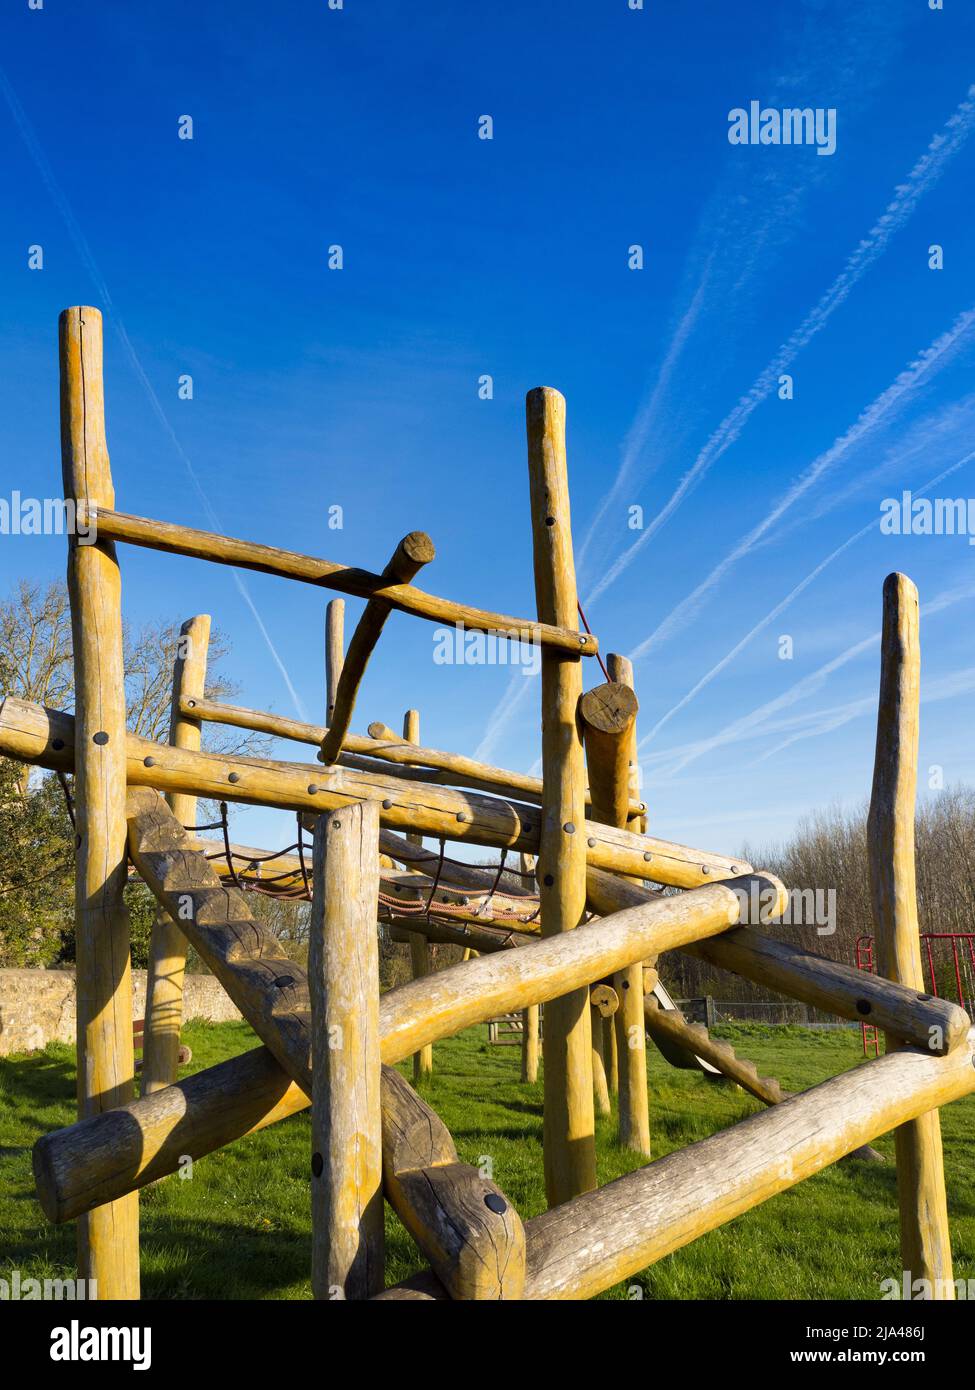 There is nothing more eerie and sad than a deserted, silent deserted playground. Here we see a climbing frame in one such in Sandford Village, just so Stock Photo